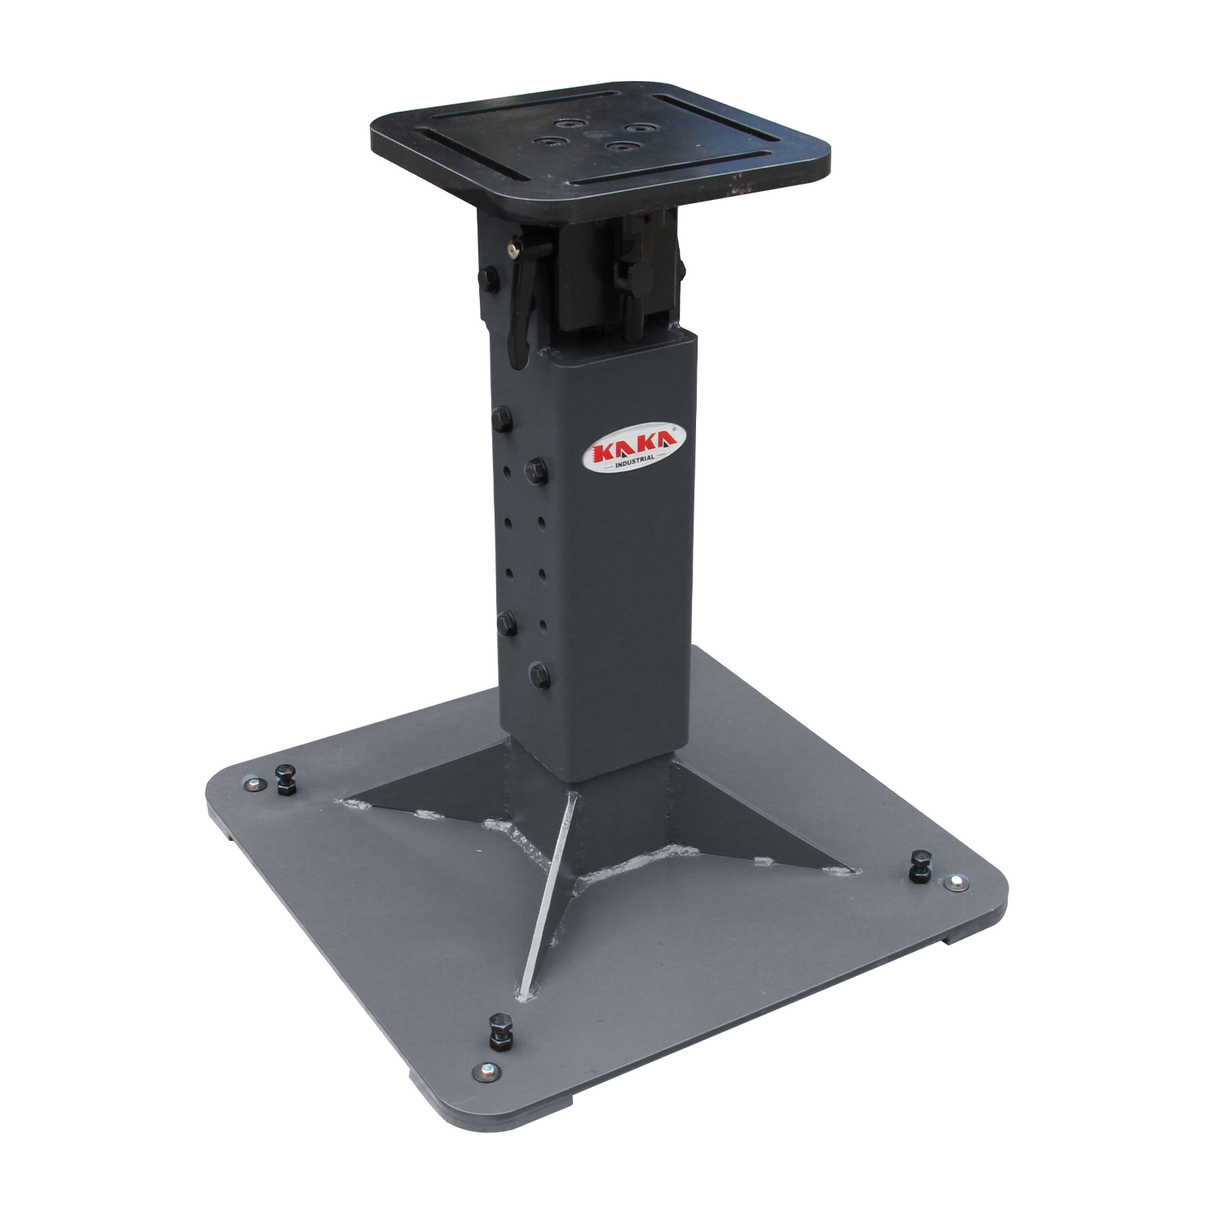 KANG Industrial WP300SM Rotary Table Manual Welding Positioner, Adjustable Table Height